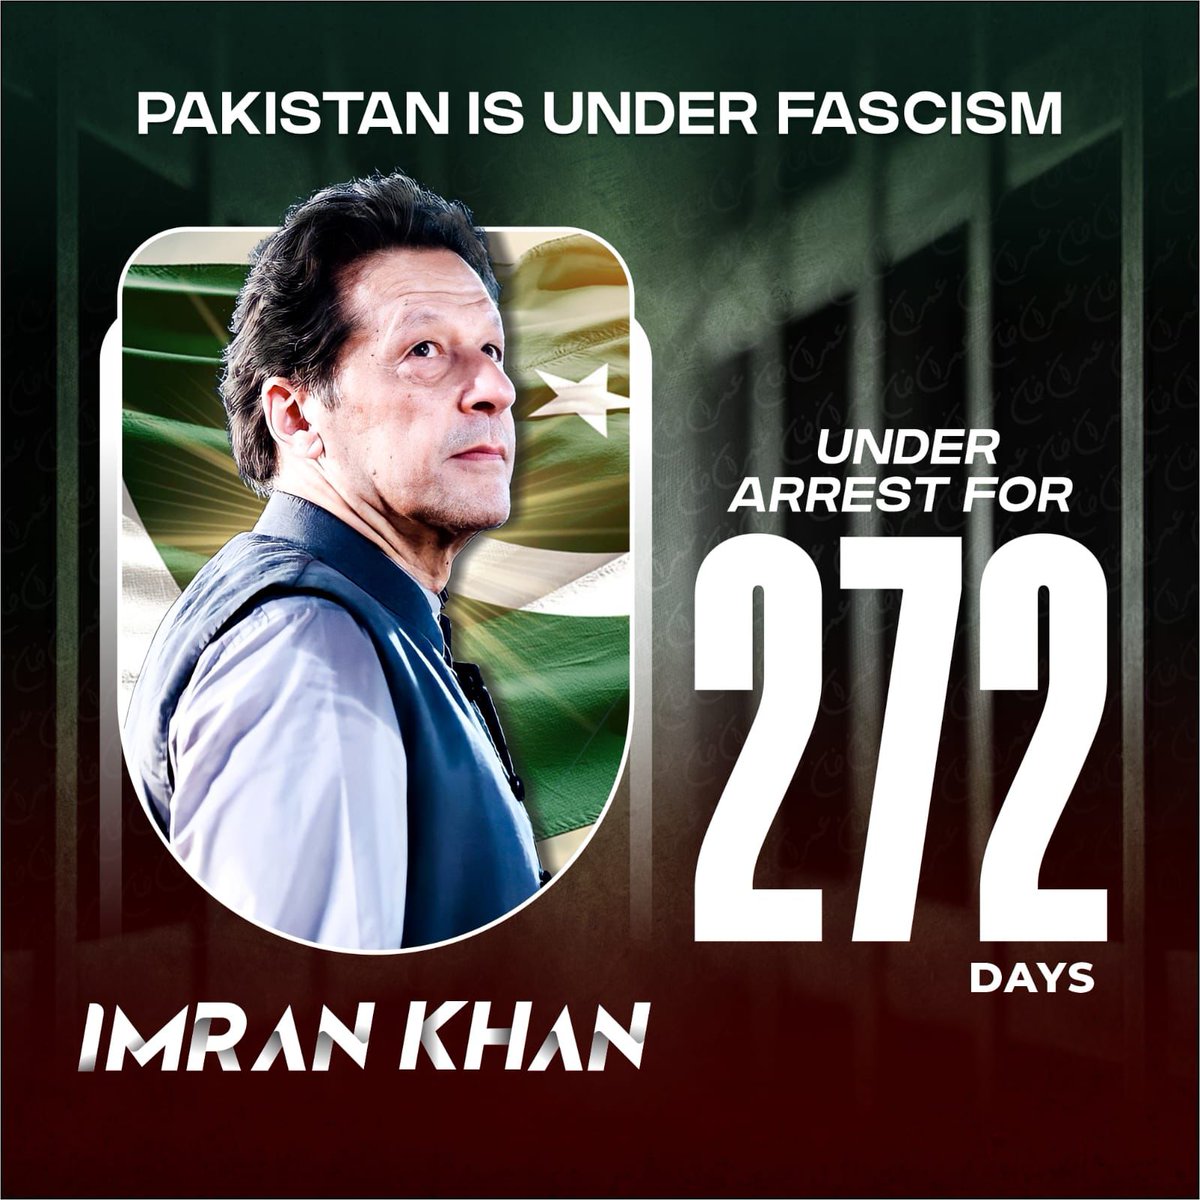 25April was one of the initiatives of 9thMay !
Breaking into Imran Khan's house and barbarism on @PTIofficial peaceful Rallies, on innocent public was a non stop series of such events. So to turn the tables they had to play this🔥
#BehindYouSkipper #9thMayFalseFlag